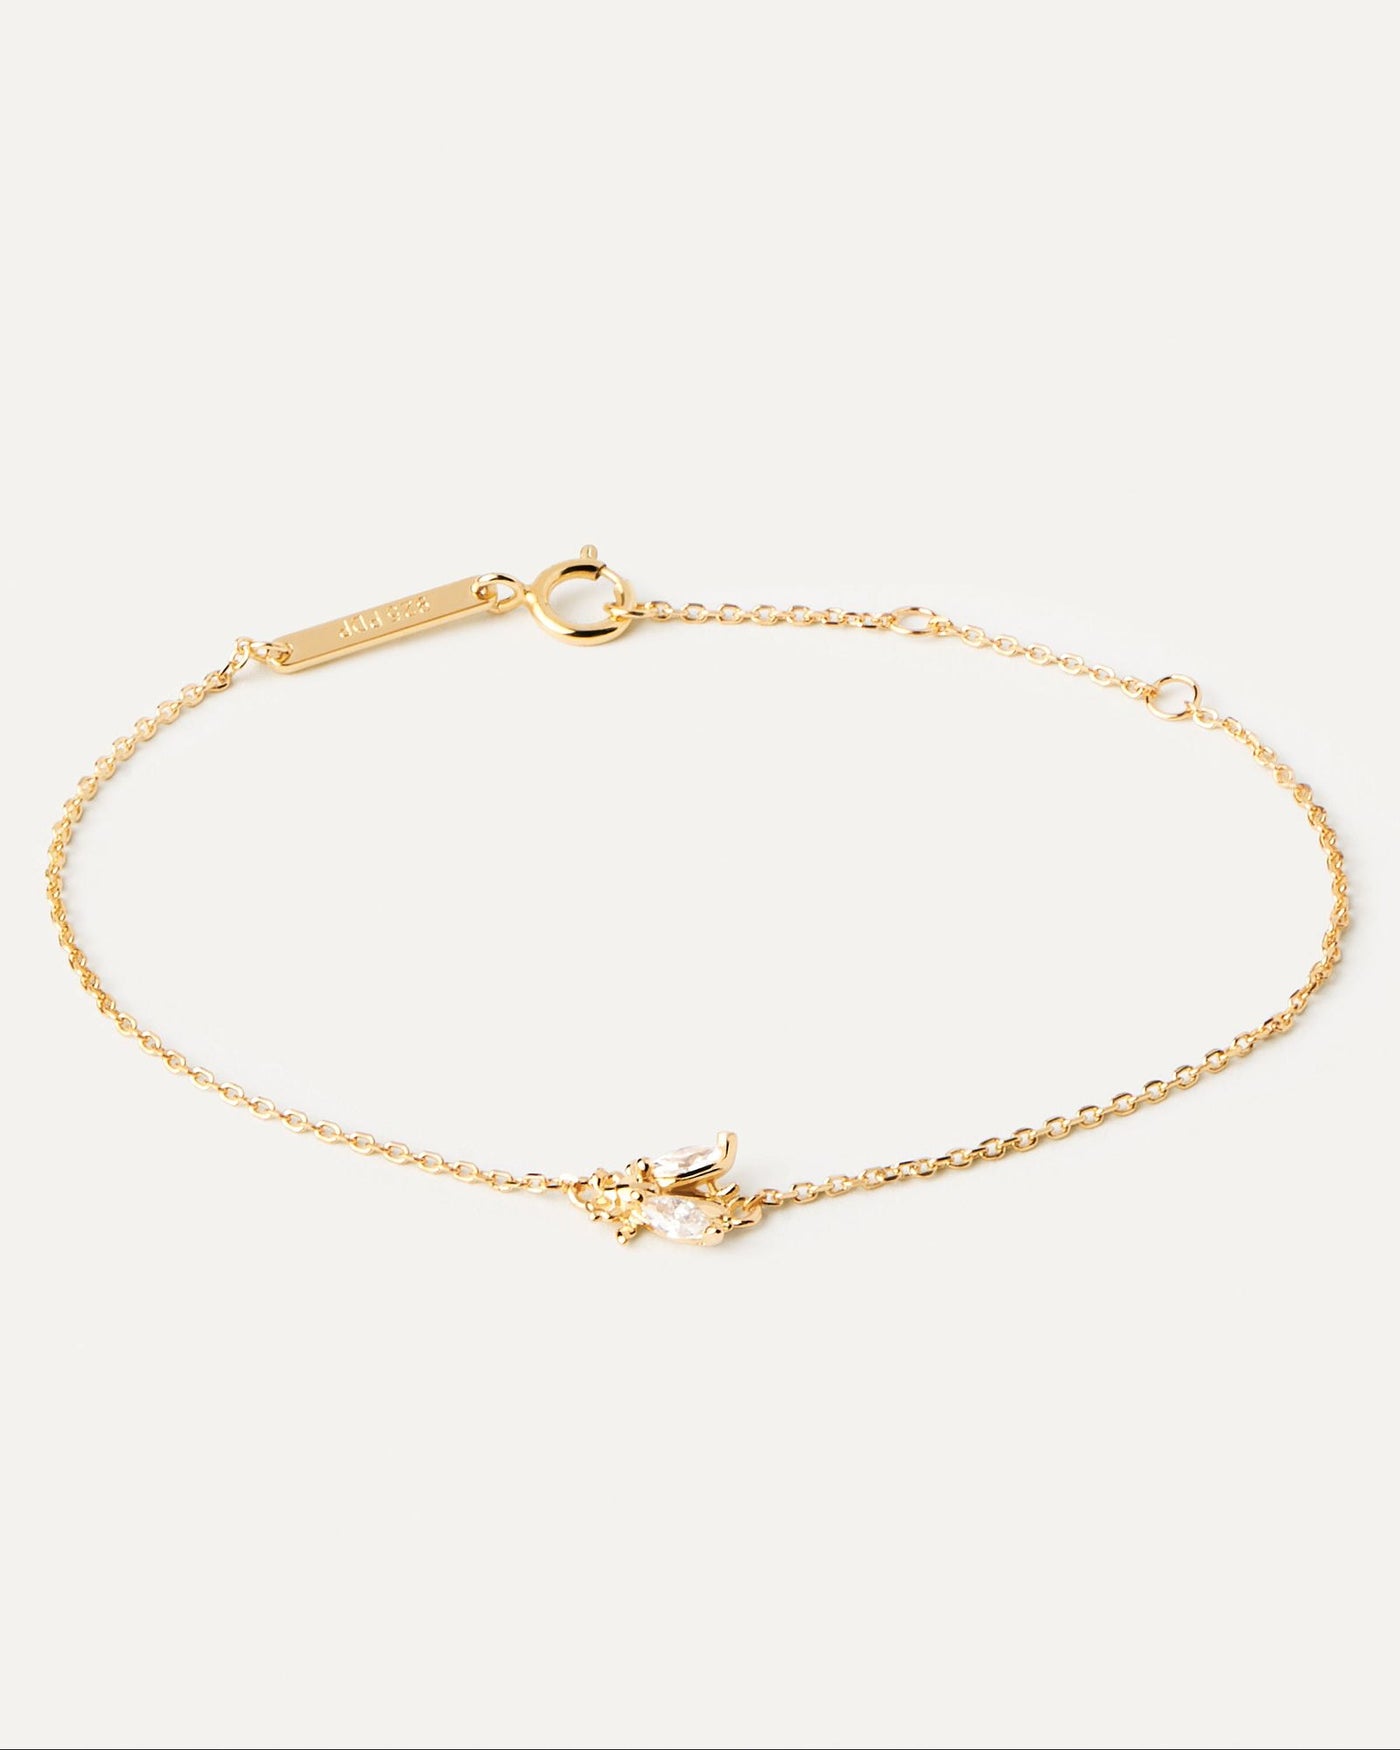 2024 Selection | Buzz Gold Bracelet. Get the latest arrival from PDPAOLA. Place your order safely and get this Best Seller. Free Shipping over 40€